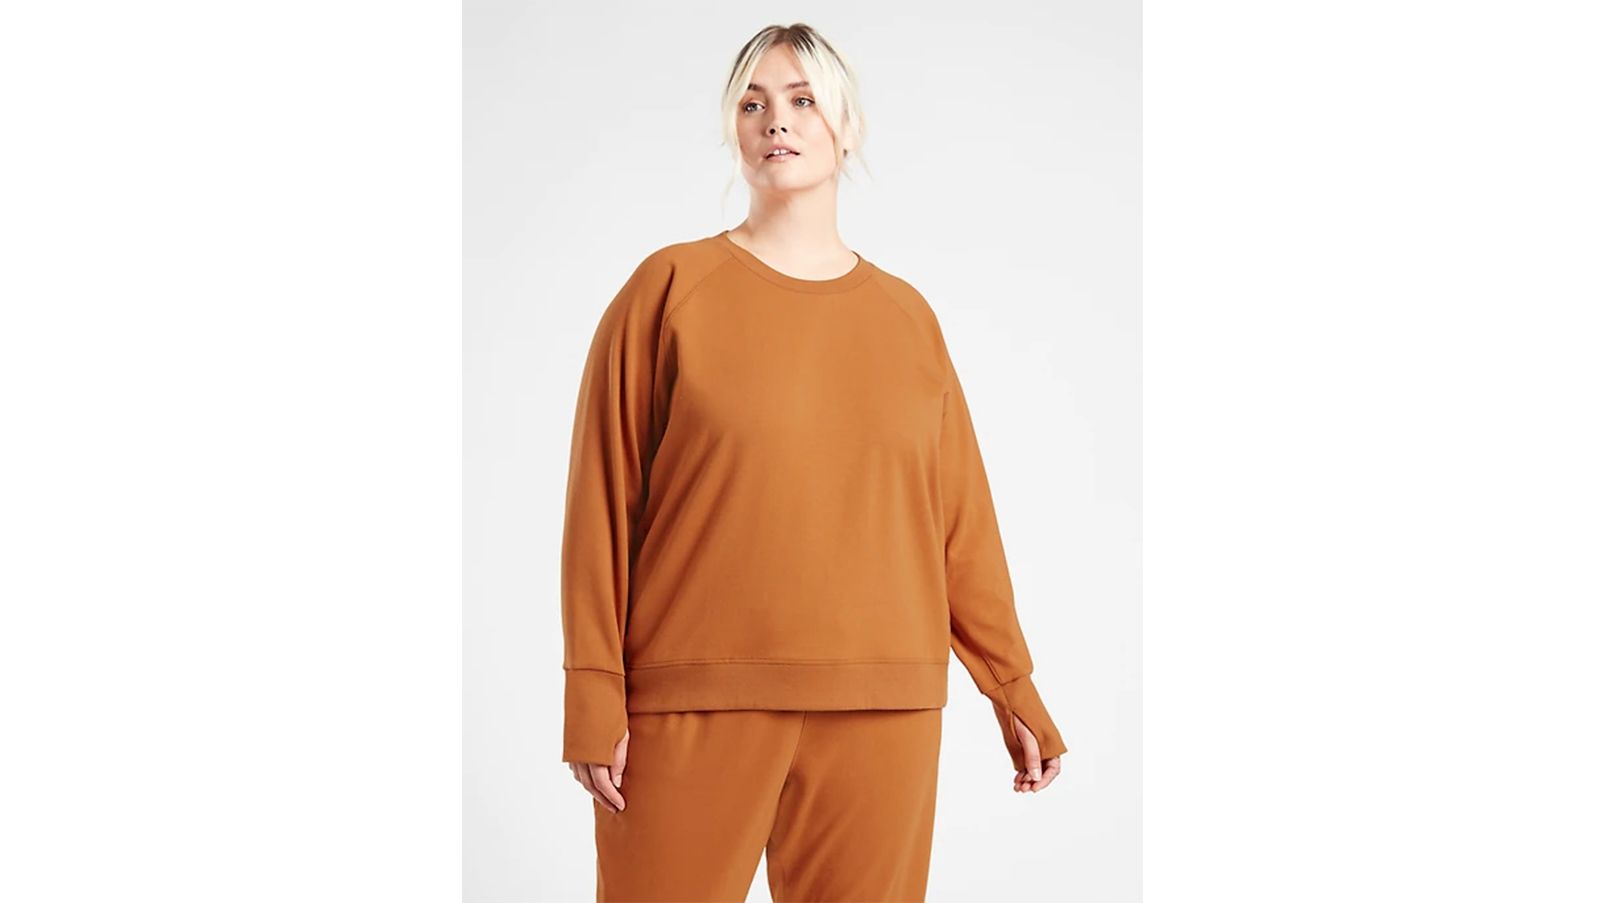 I Found The Best Sweatsuit On The Internet